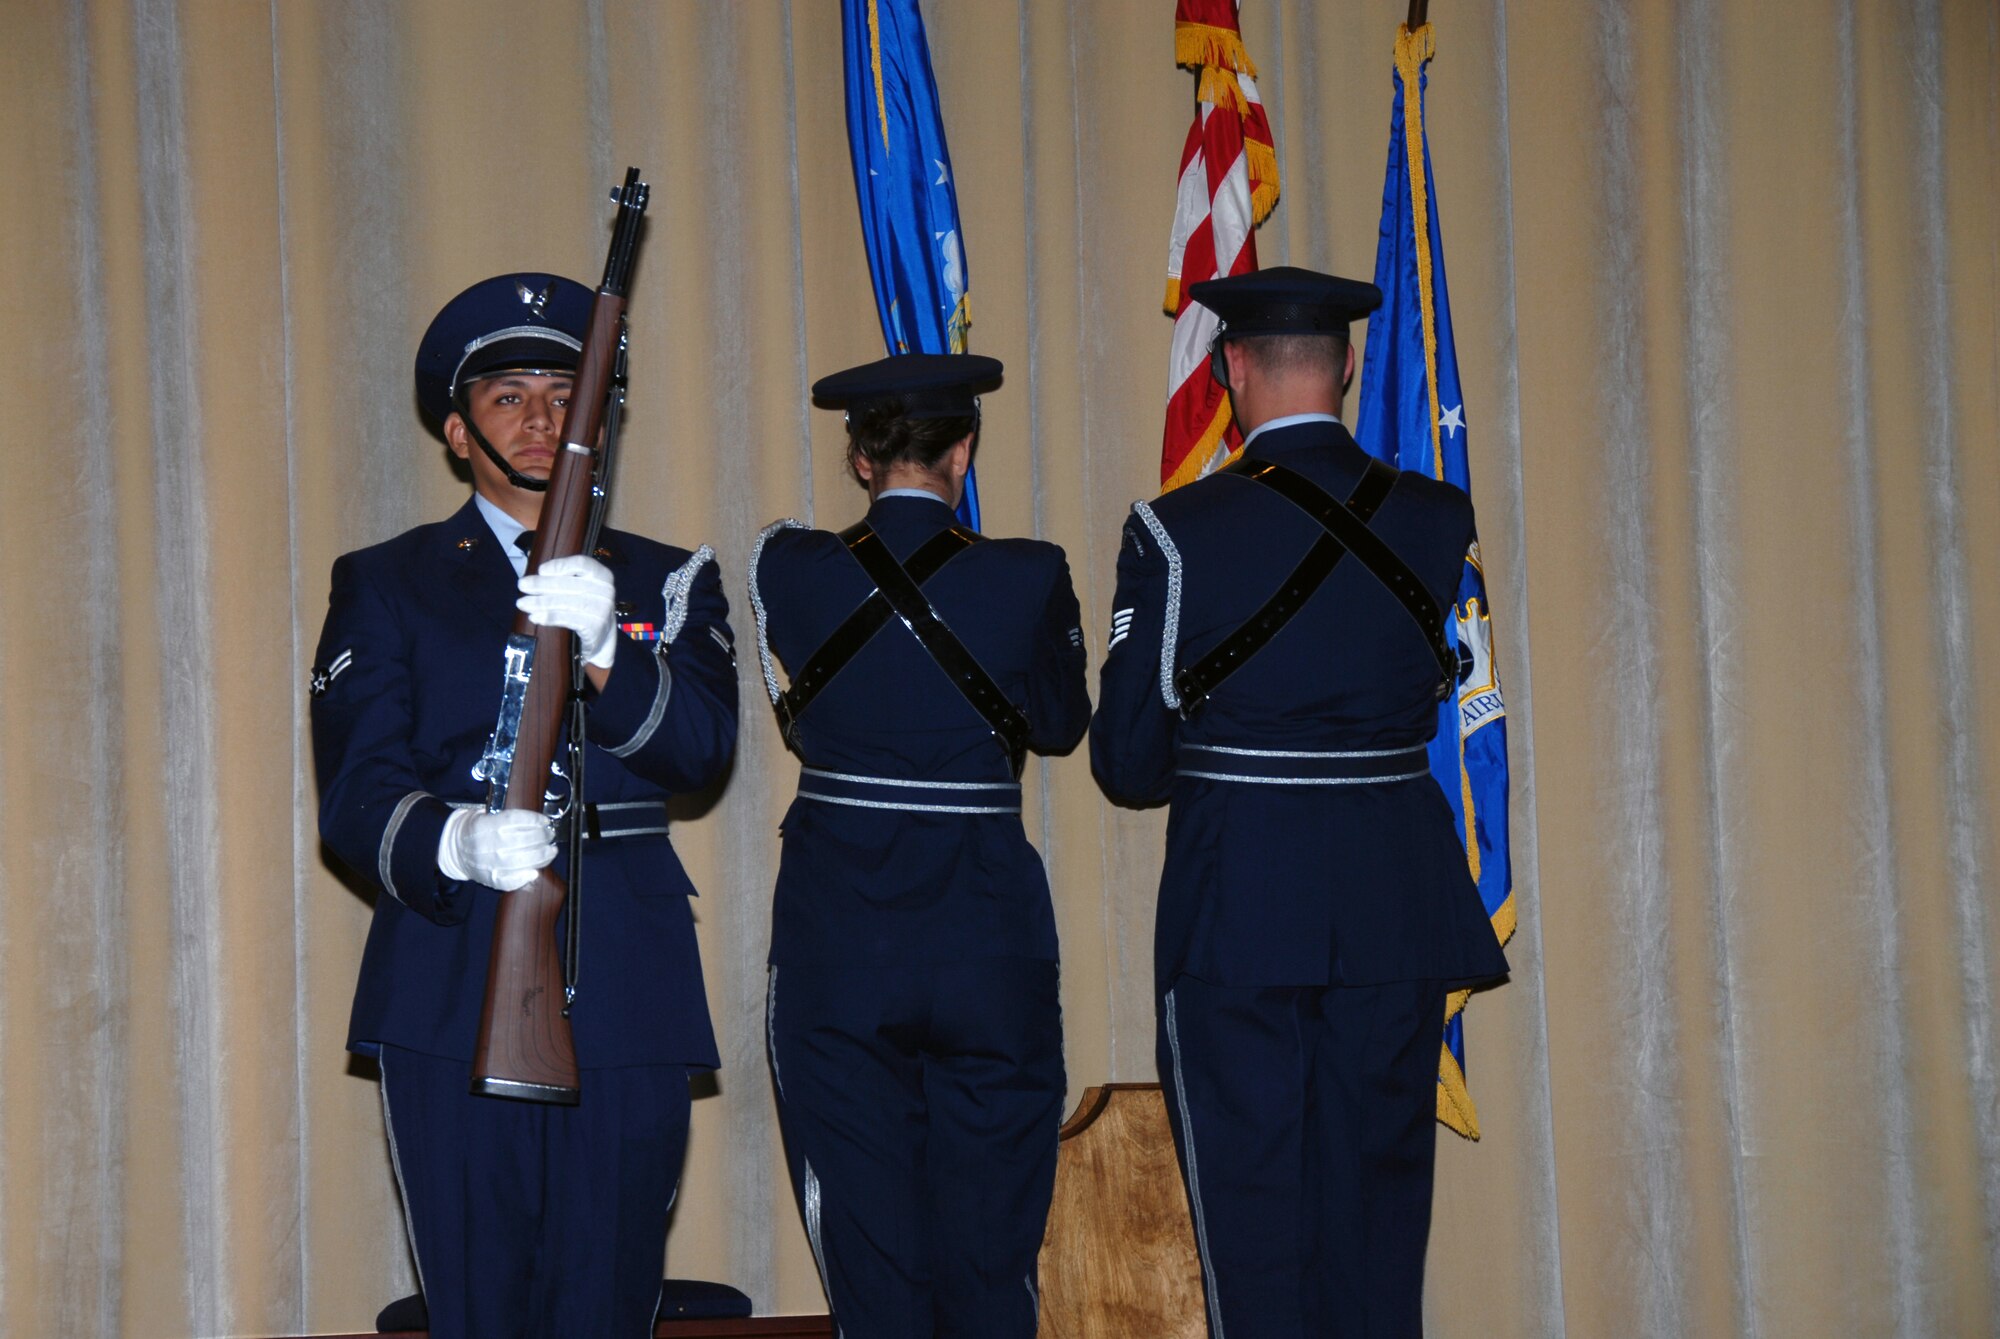 Members of the Maxwell AFB Honor Guard post the colors at the 908th Airlift Wing Change of Command ceremony June 7 at Maxwell AFB's Polifka auditorium.  Col. Brett Clark replaced Col. Michael Underkofler as commander of the Montgomery,Ala.-based C-130 unit. (U.S. Air Force photo by Mr. Jeff Melvin)